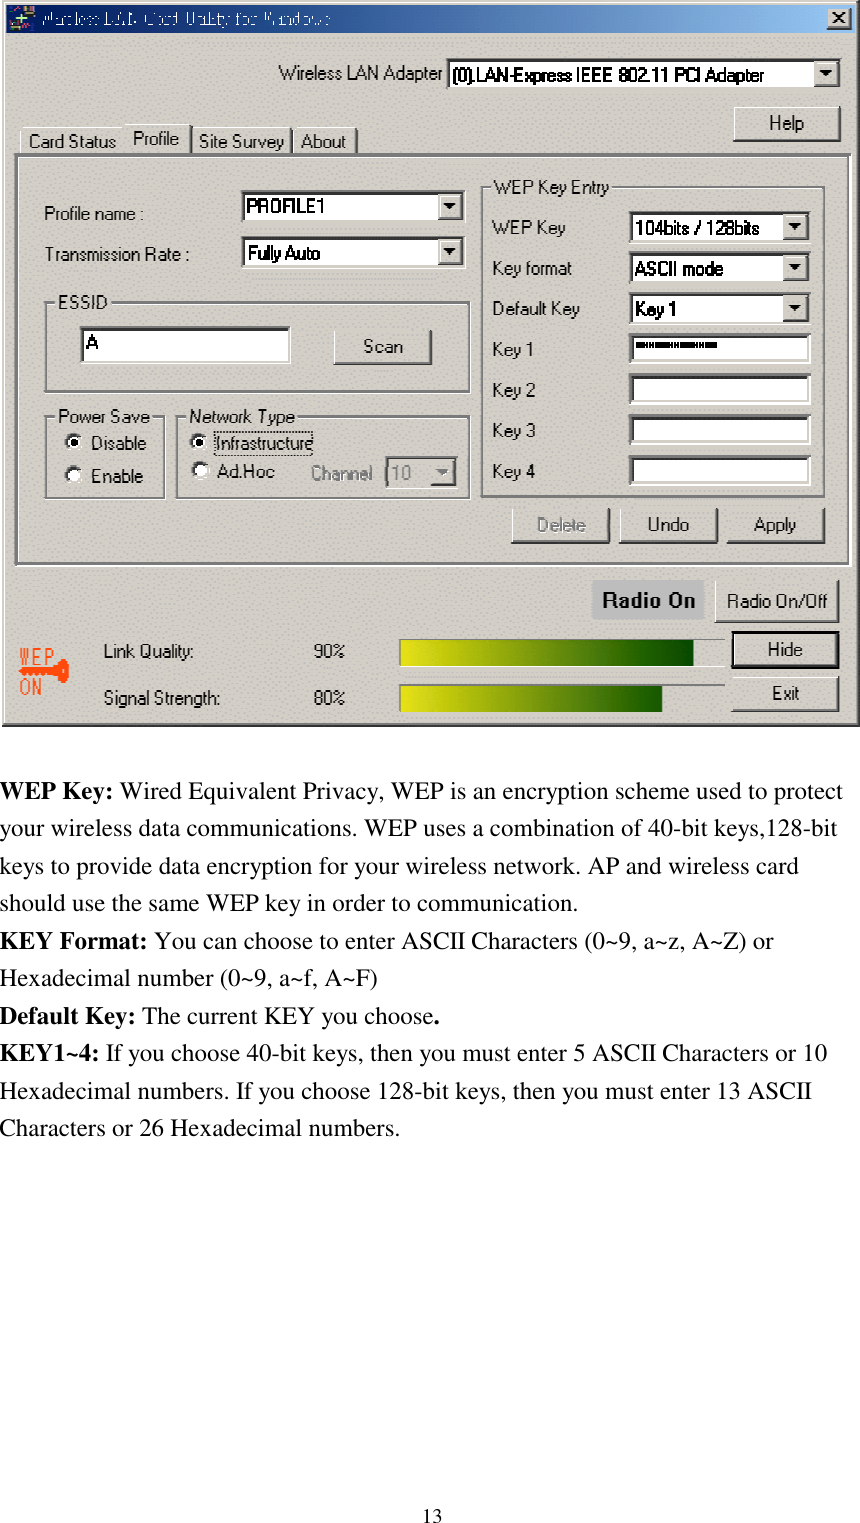 13WEP Key: Wired Equivalent Privacy, WEP is an encryption scheme used to protectyour wireless data communications. WEP uses a combination of 40-bit keys,128-bitkeys to provide data encryption for your wireless network. AP and wireless cardshould use the same WEP key in order to communication.KEY Format: You can choose to enter ASCII Characters (0~9, a~z, A~Z) orHexadecimal number (0~9, a~f, A~F)Default Key: The current KEY you choose.KEY1~4: If you choose 40-bit keys, then you must enter 5 ASCII Characters or 10Hexadecimal numbers. If you choose 128-bit keys, then you must enter 13 ASCIICharacters or 26 Hexadecimal numbers.